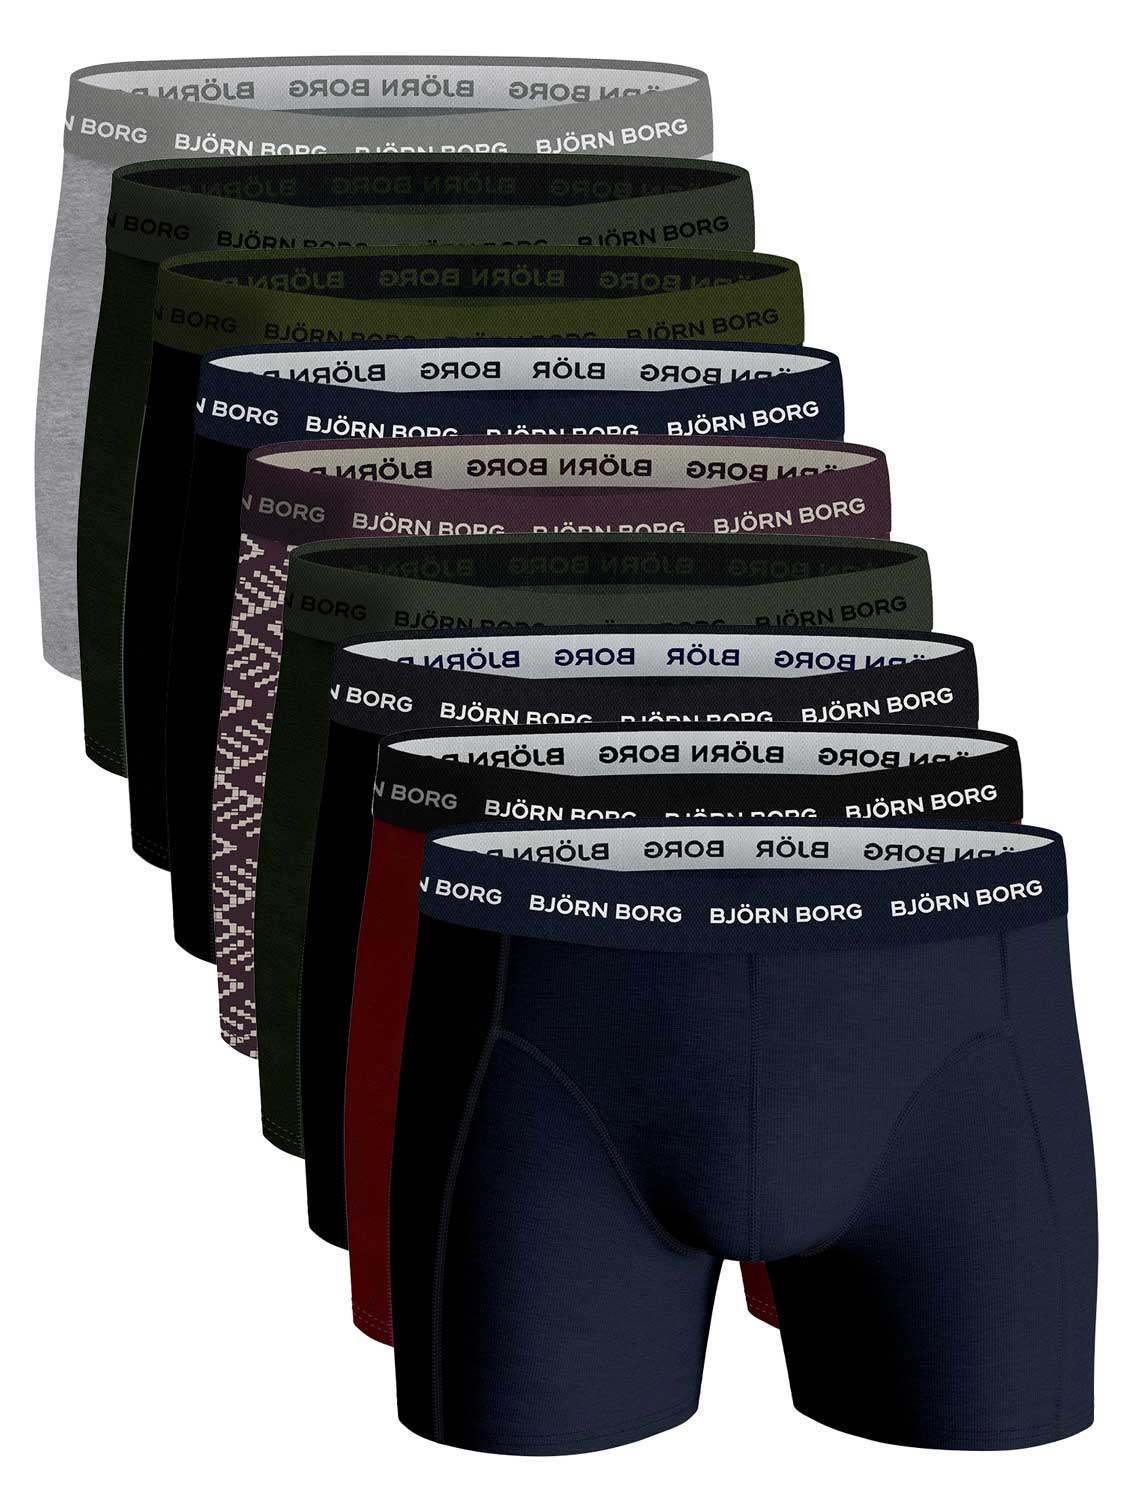 Björn Borg Cotton Stretch boxers - heren boxers normale lengte (9-pack) - multicolor - Maat: L